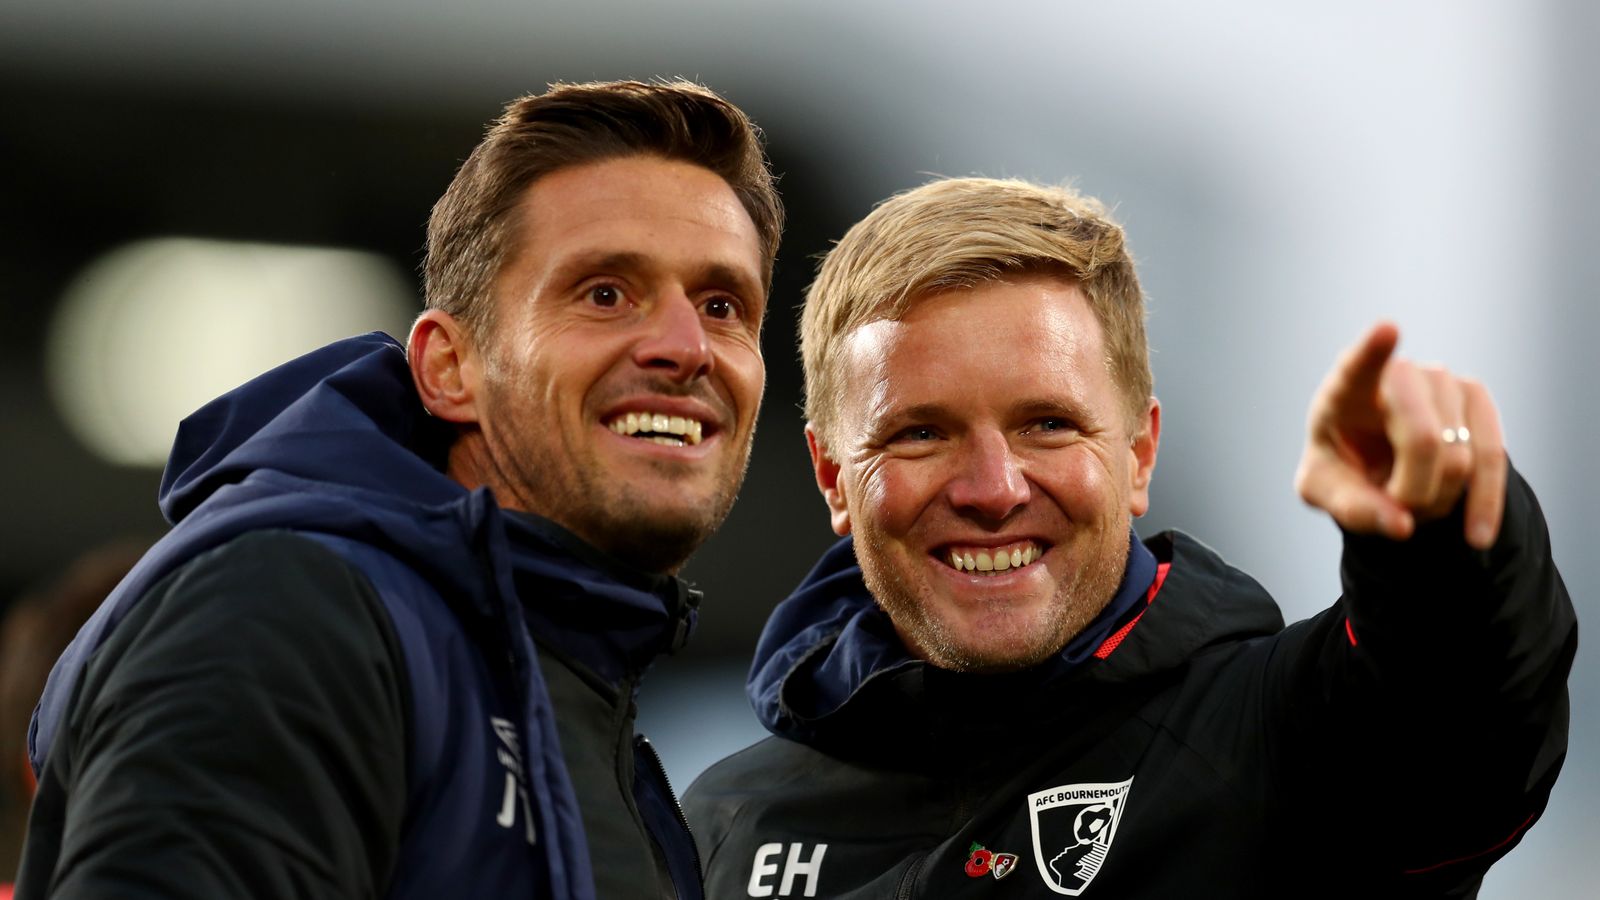 Eddie Howe named Premier League manager of the month for October